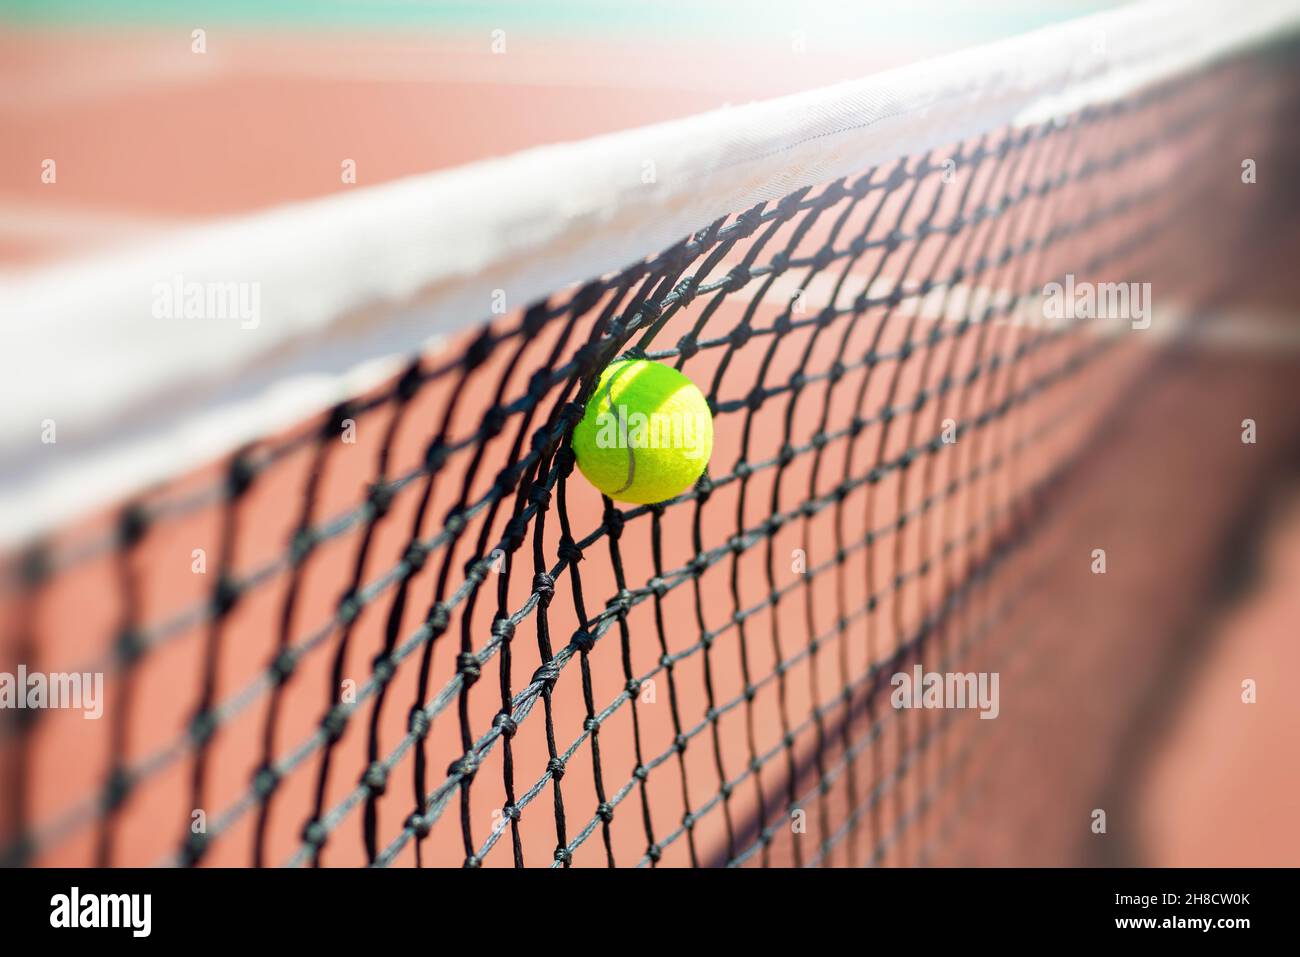 Tennis ball hits in the net during game. Stock Photo